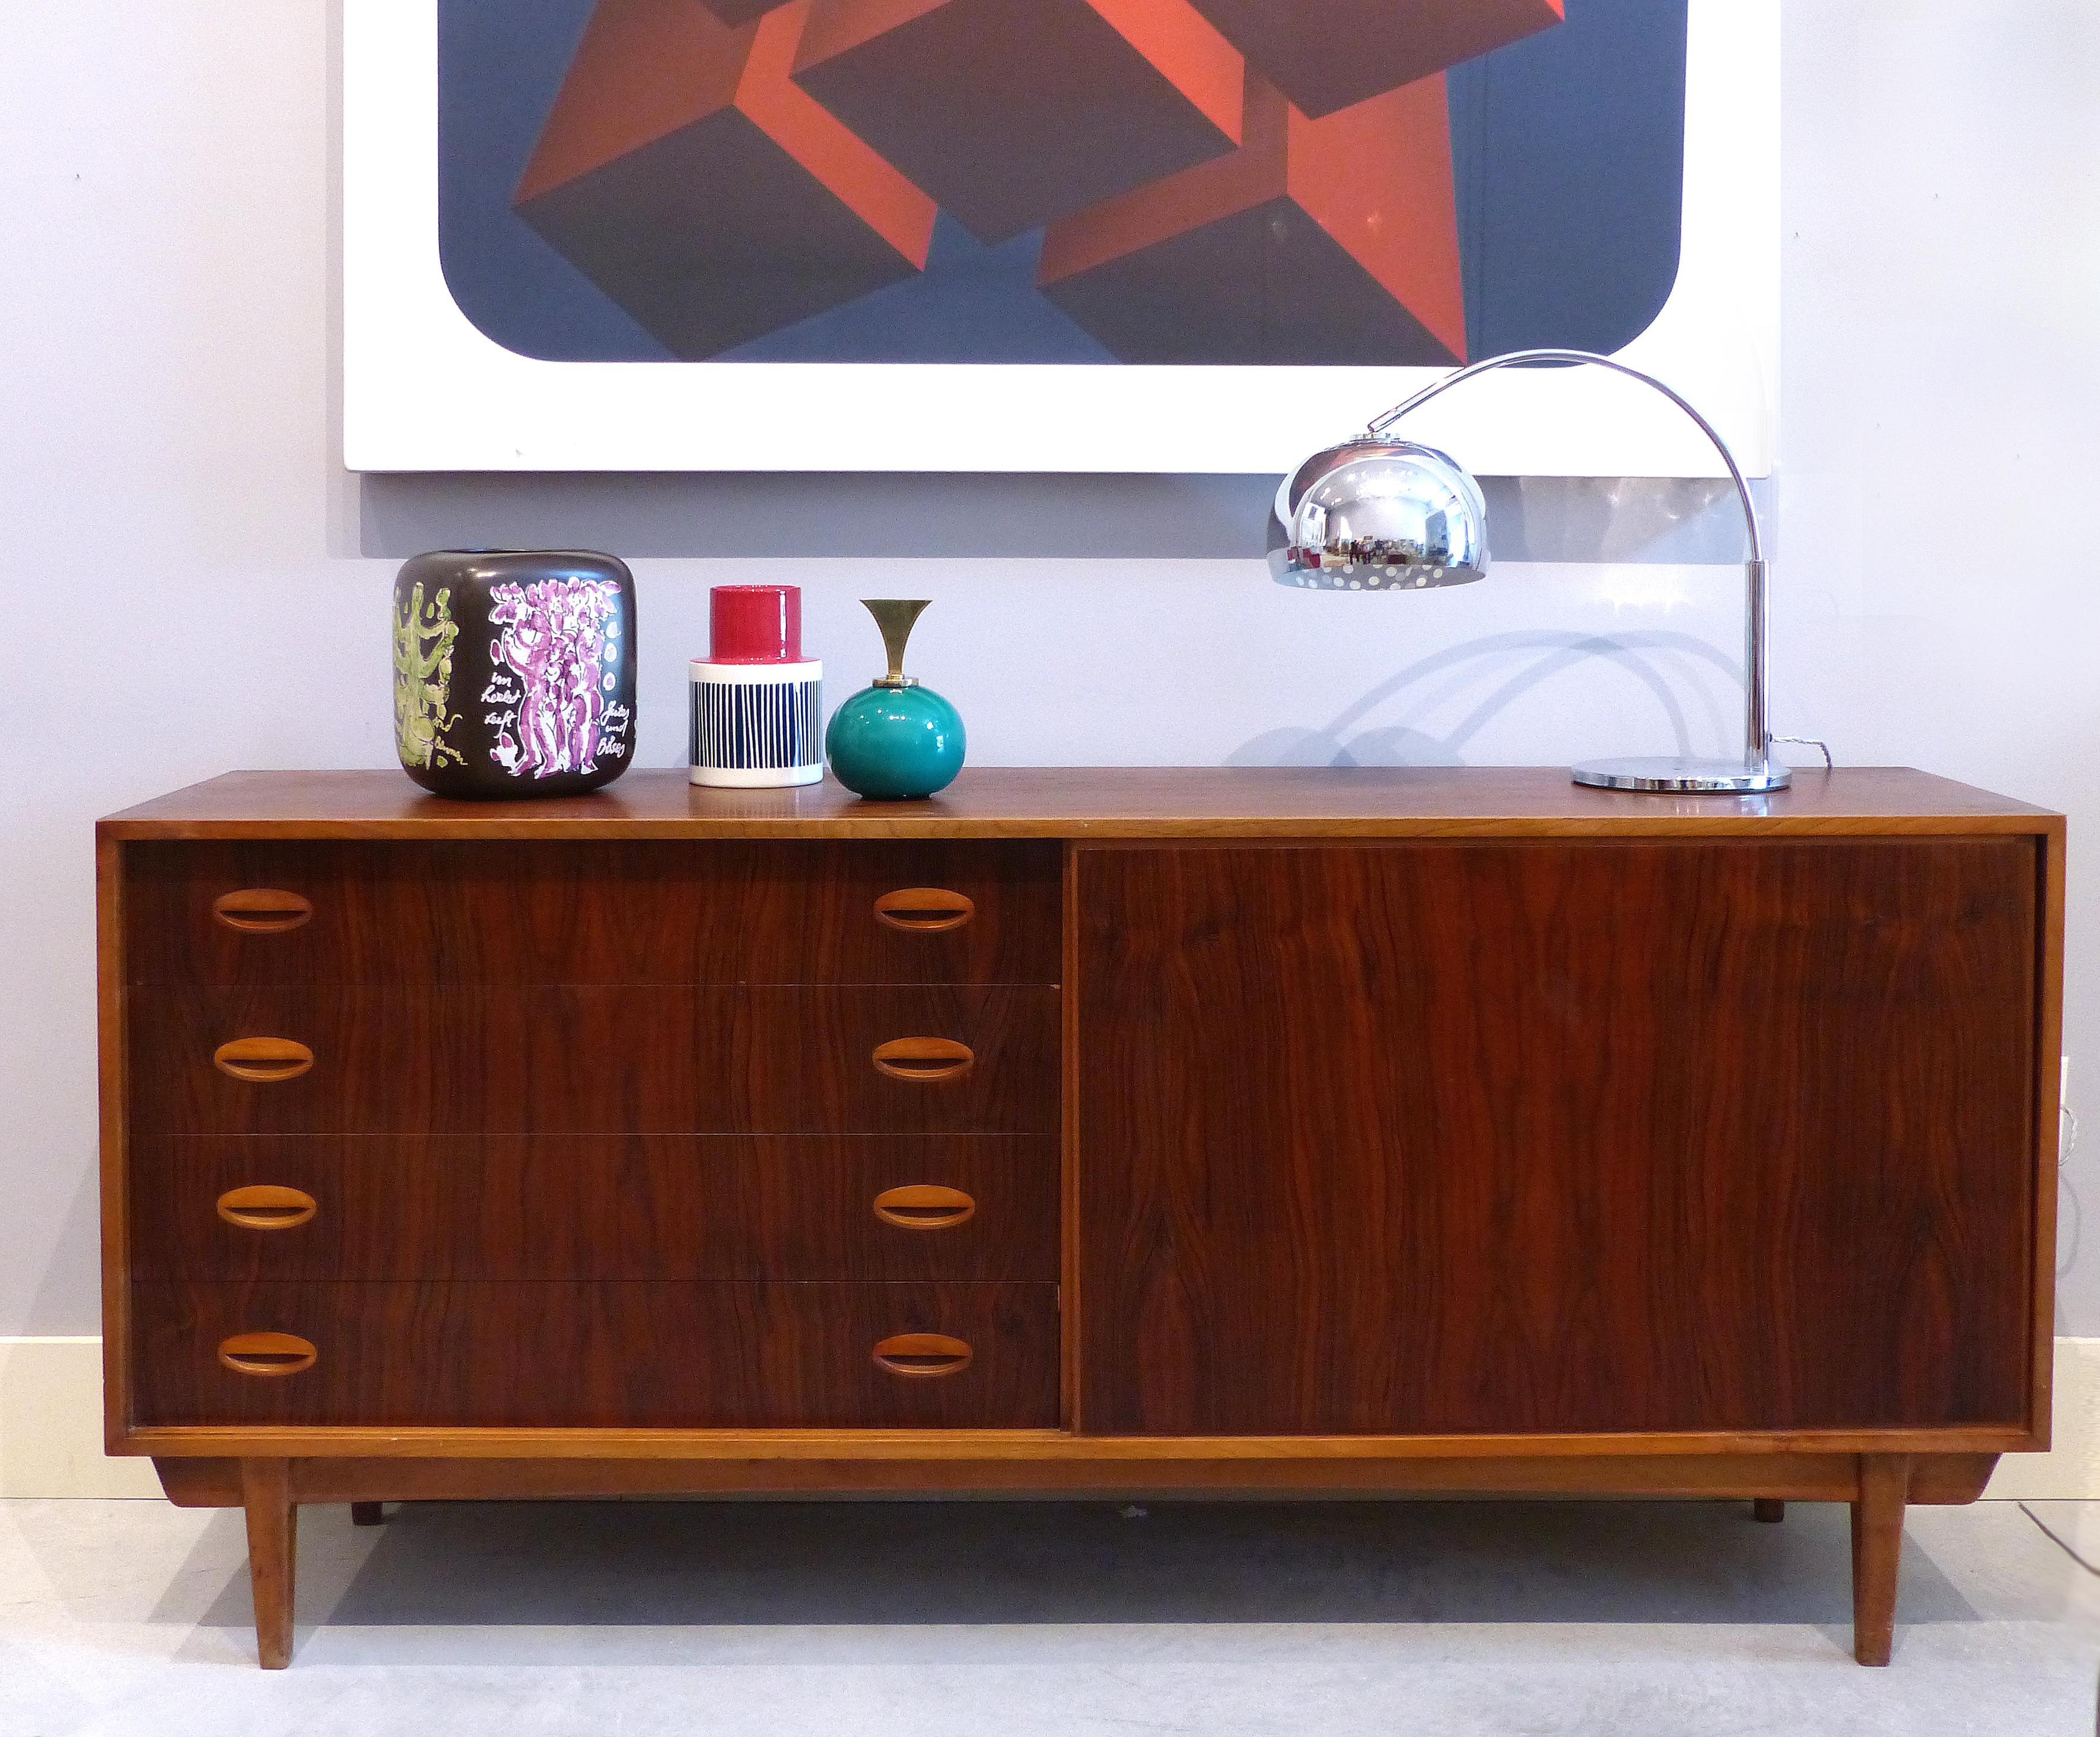 Mid-Century Modern Scandinavian Teak and Rosewood Credenza

Offered for sale is a Mid-Century Modern Scandinavian teak and rosewood credenza. The vertical rosewood grained door slides from side to side allowing for access to either the drawers to